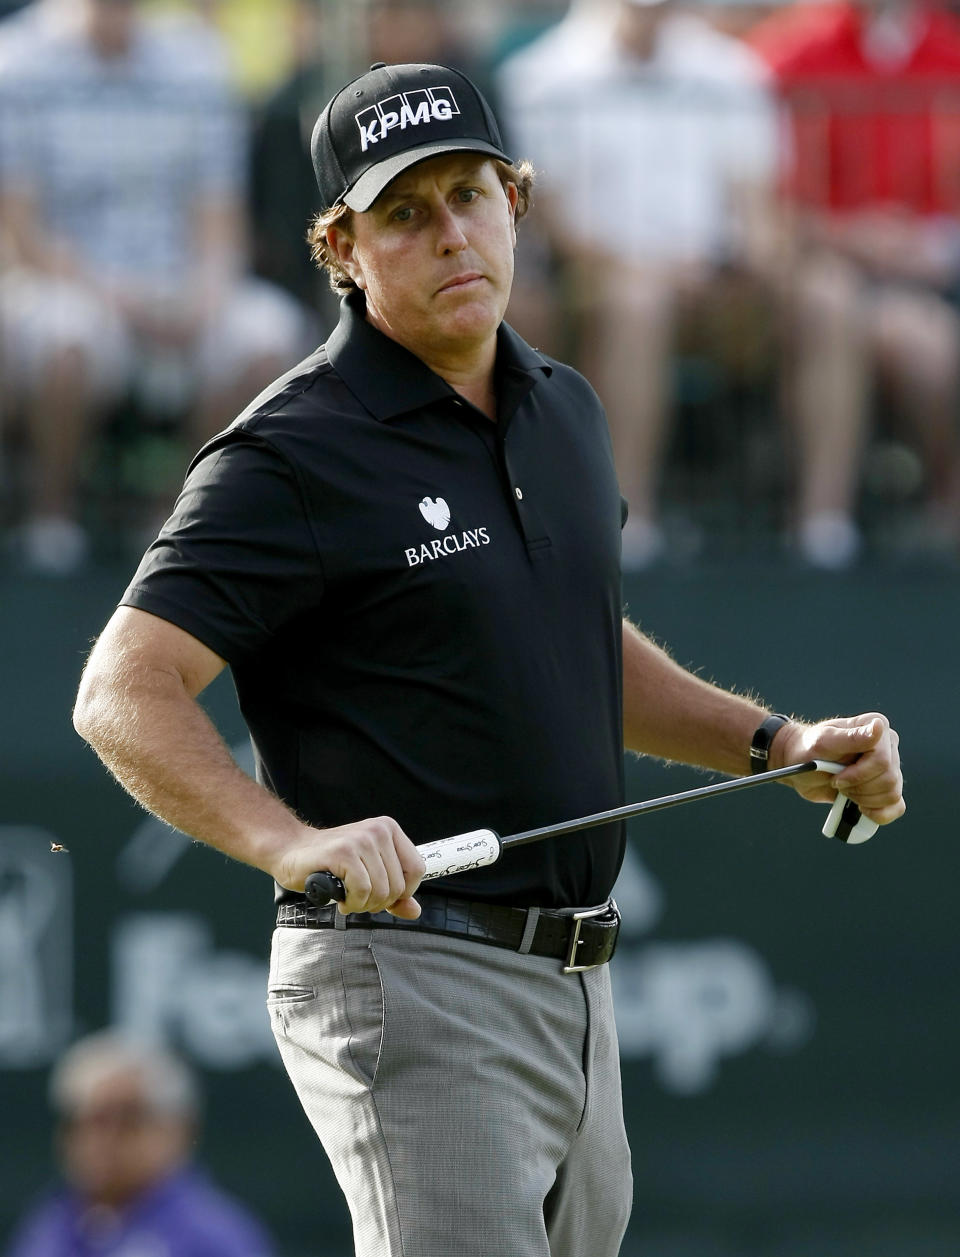 Phil Mickelson reacts to a missed putt on the 16th hole during the first round of the Waste Management Phoenix Open golf tournament on Thursday, Jan. 30, 2014, in Scottsdale, Ariz. (AP Photo/Rick Scuteri)